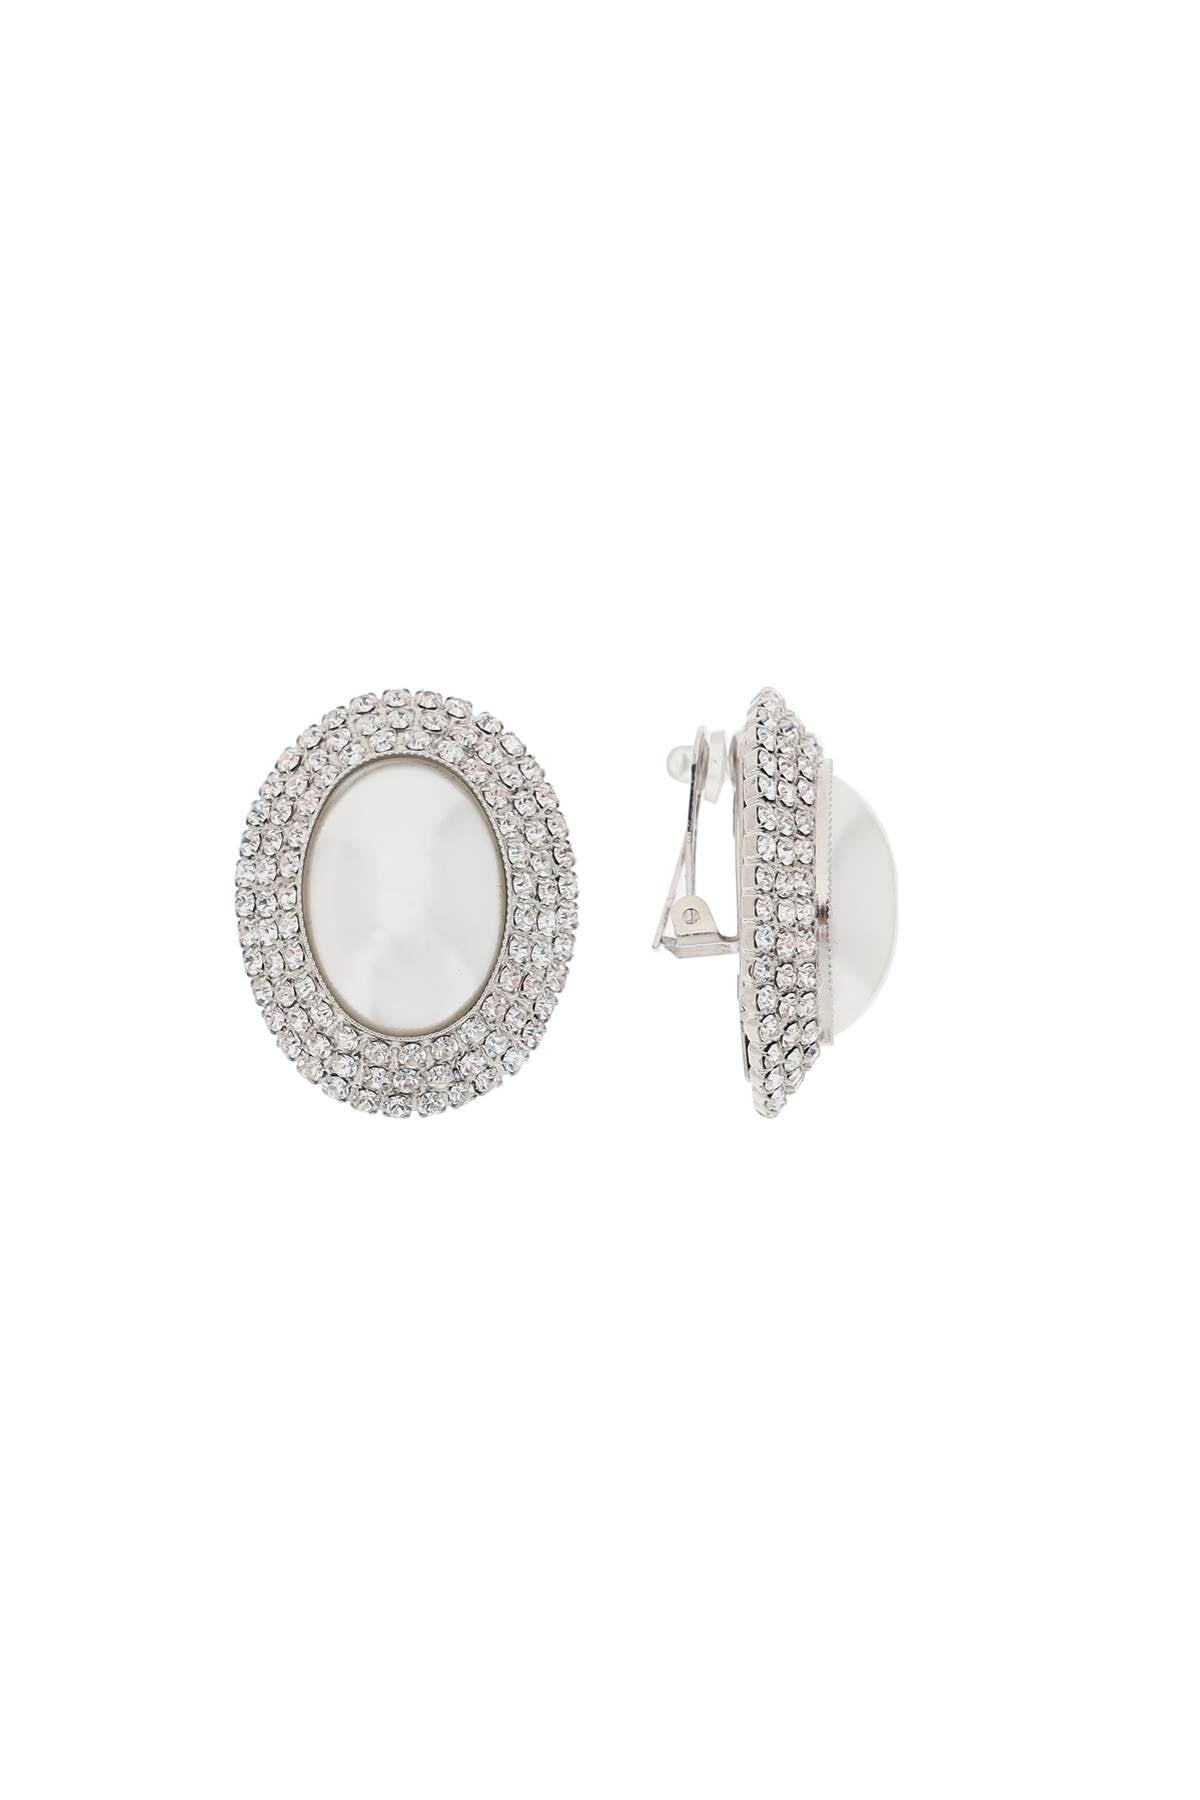 Alessandra rich oval earrings with pearl and crystals-0